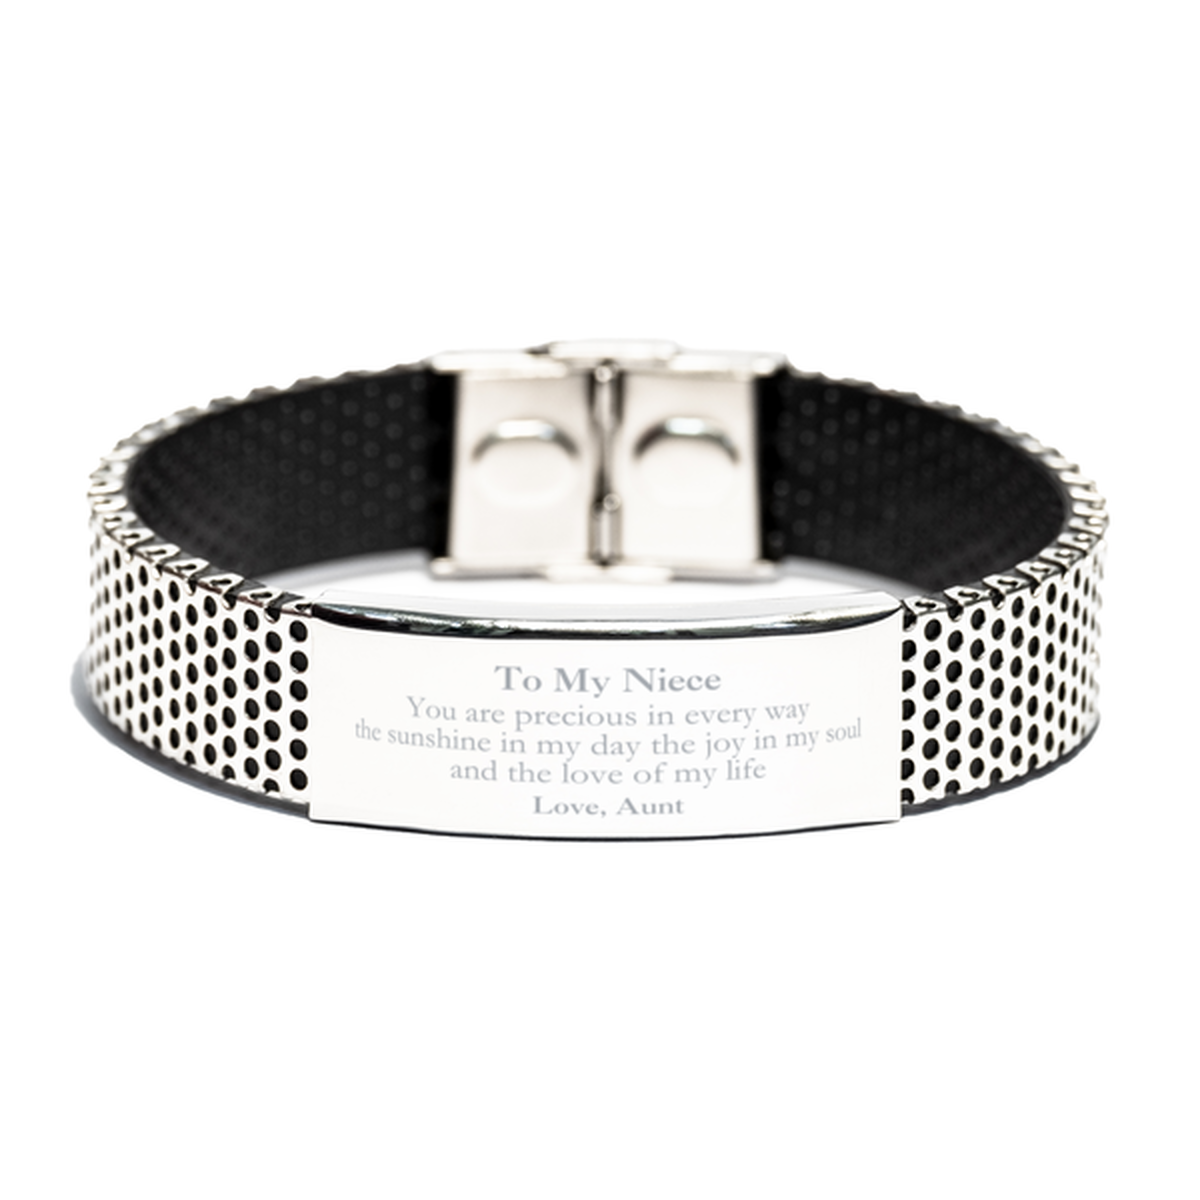 Graduation Gifts for Niece Stainless Steel Bracelet Present from Aunt, Christmas Niece Birthday Gifts Niece You are precious in every way the sunshine in my day. Love, Aunt